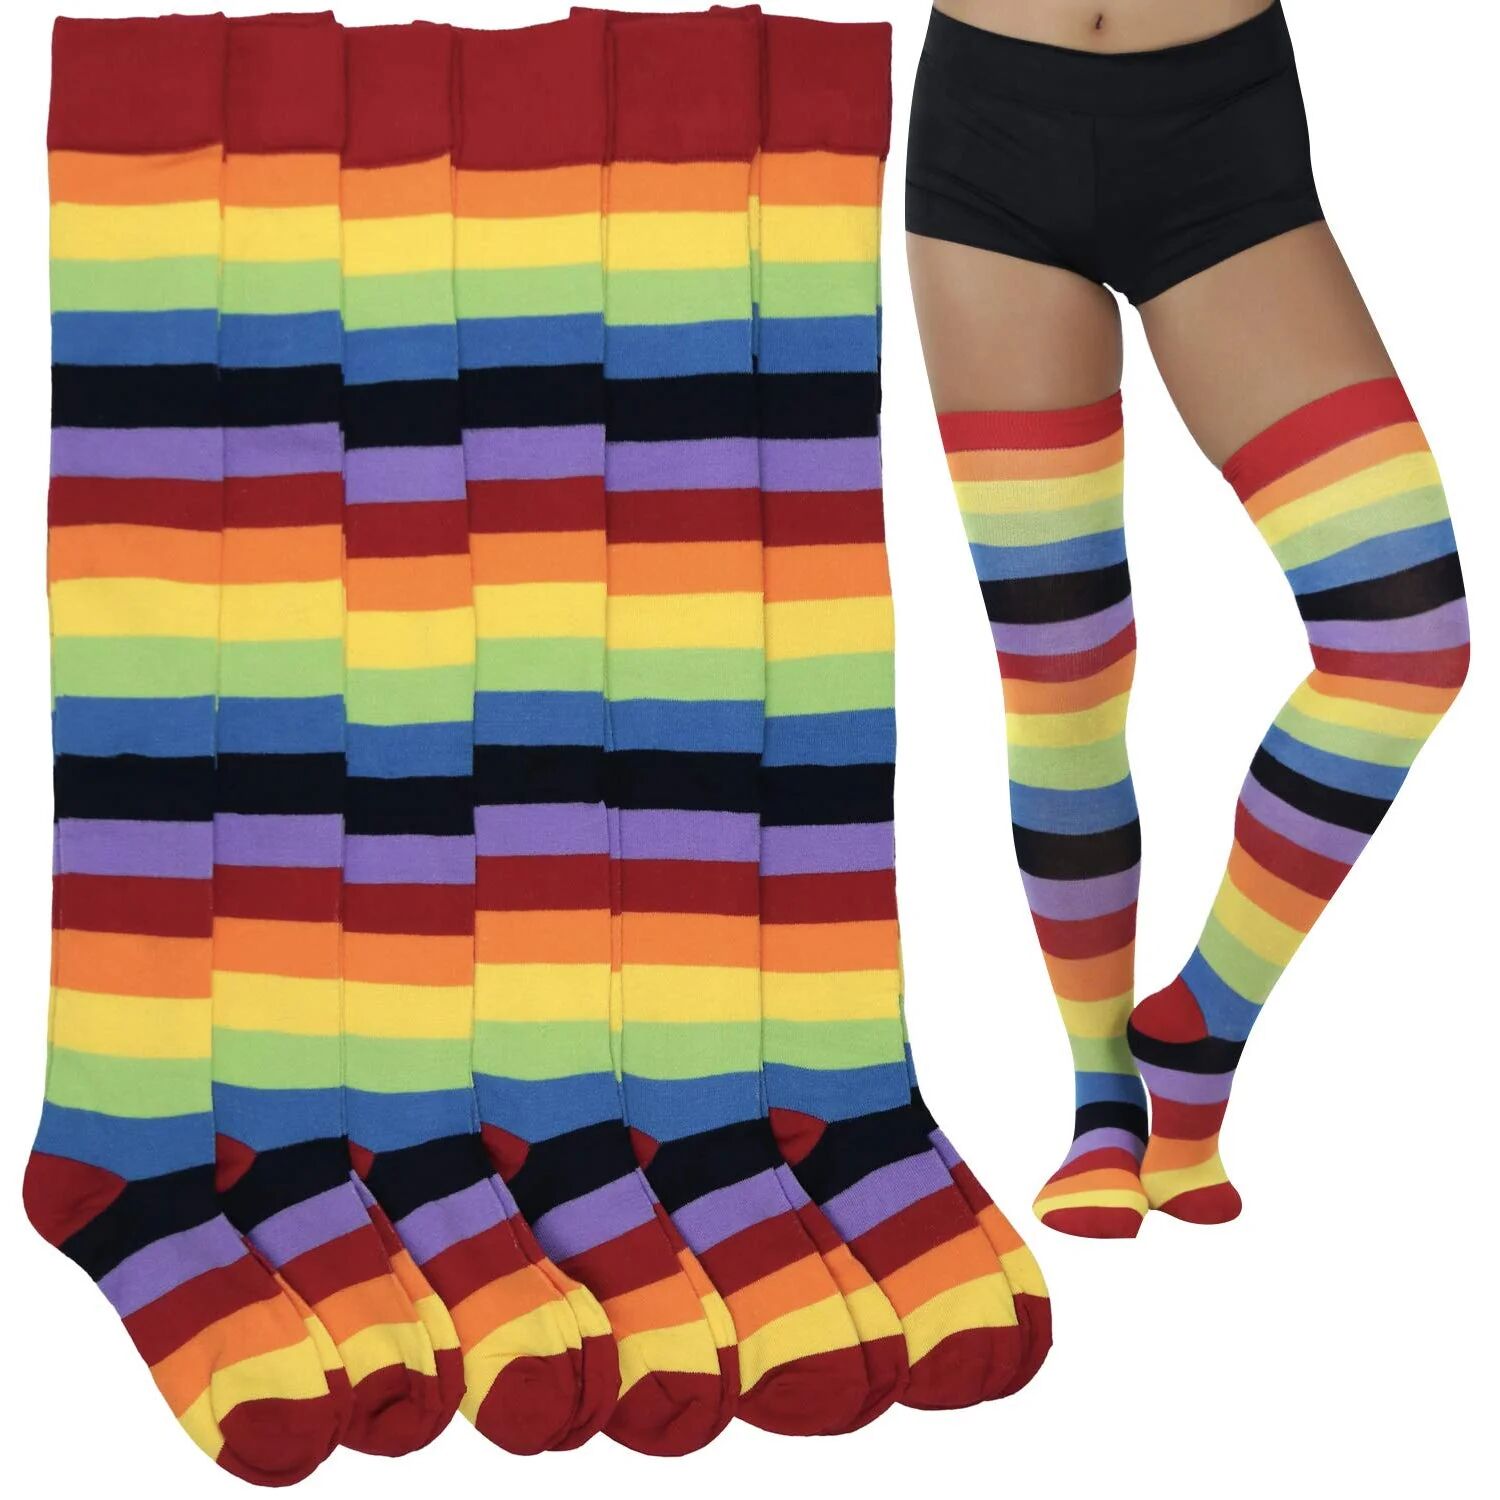 DailySale 6-Pack: ToBeInStyle Women's Bright Rainbow Striped Thigh High Rave Stockings